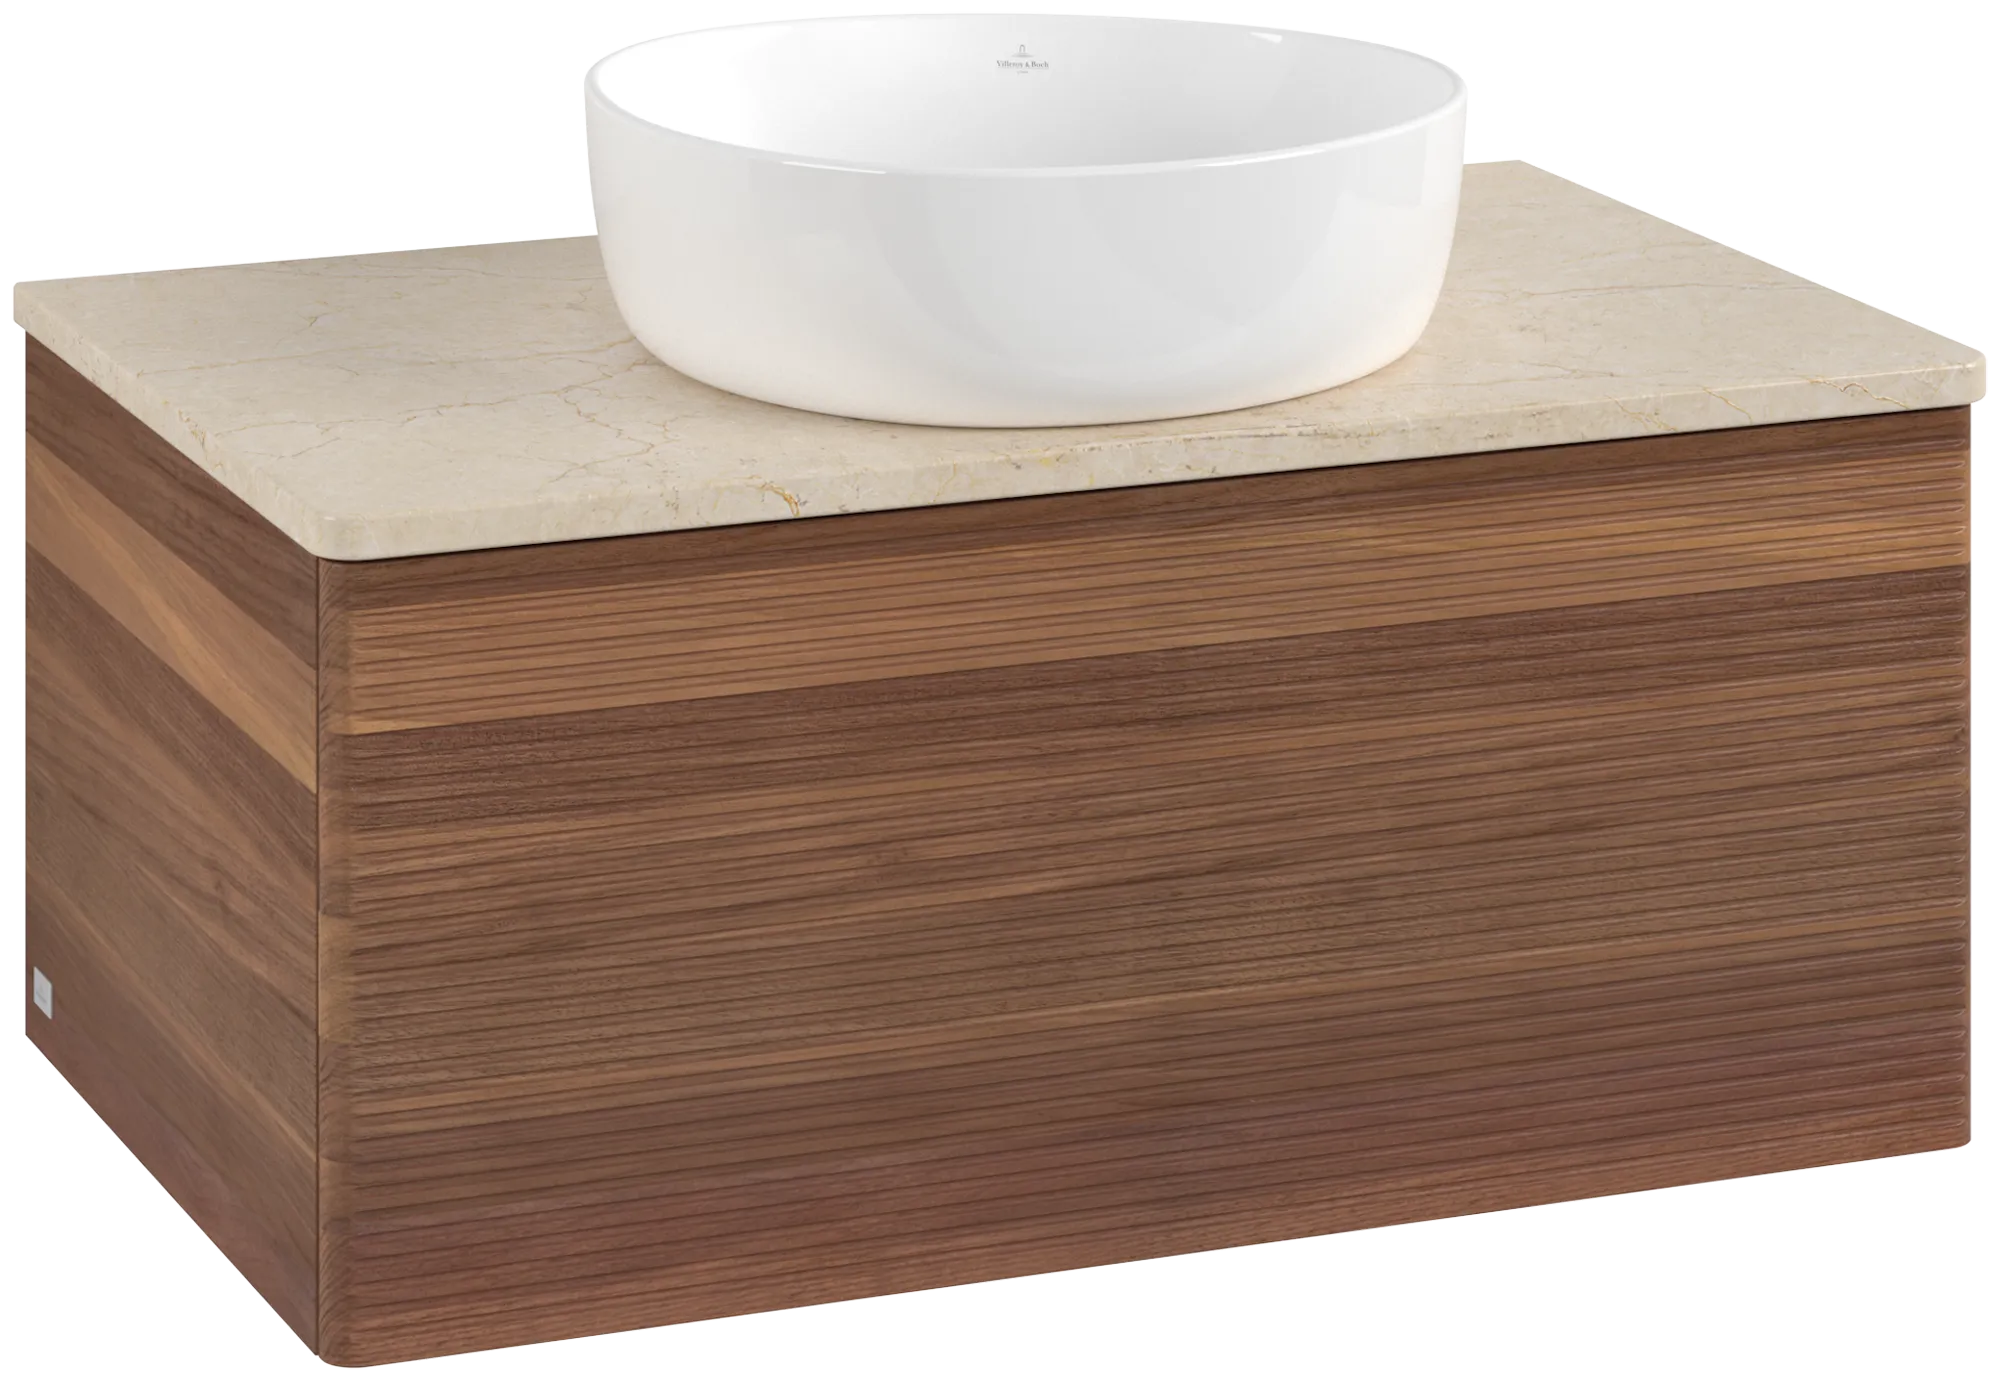 Obrázek VILLEROY BOCH Antao Vanity unit, with lighting, 1 pull-out compartment, 800 x 360 x 500 mm, Front with grain texture, Warm Walnut / Botticino #L30113HM